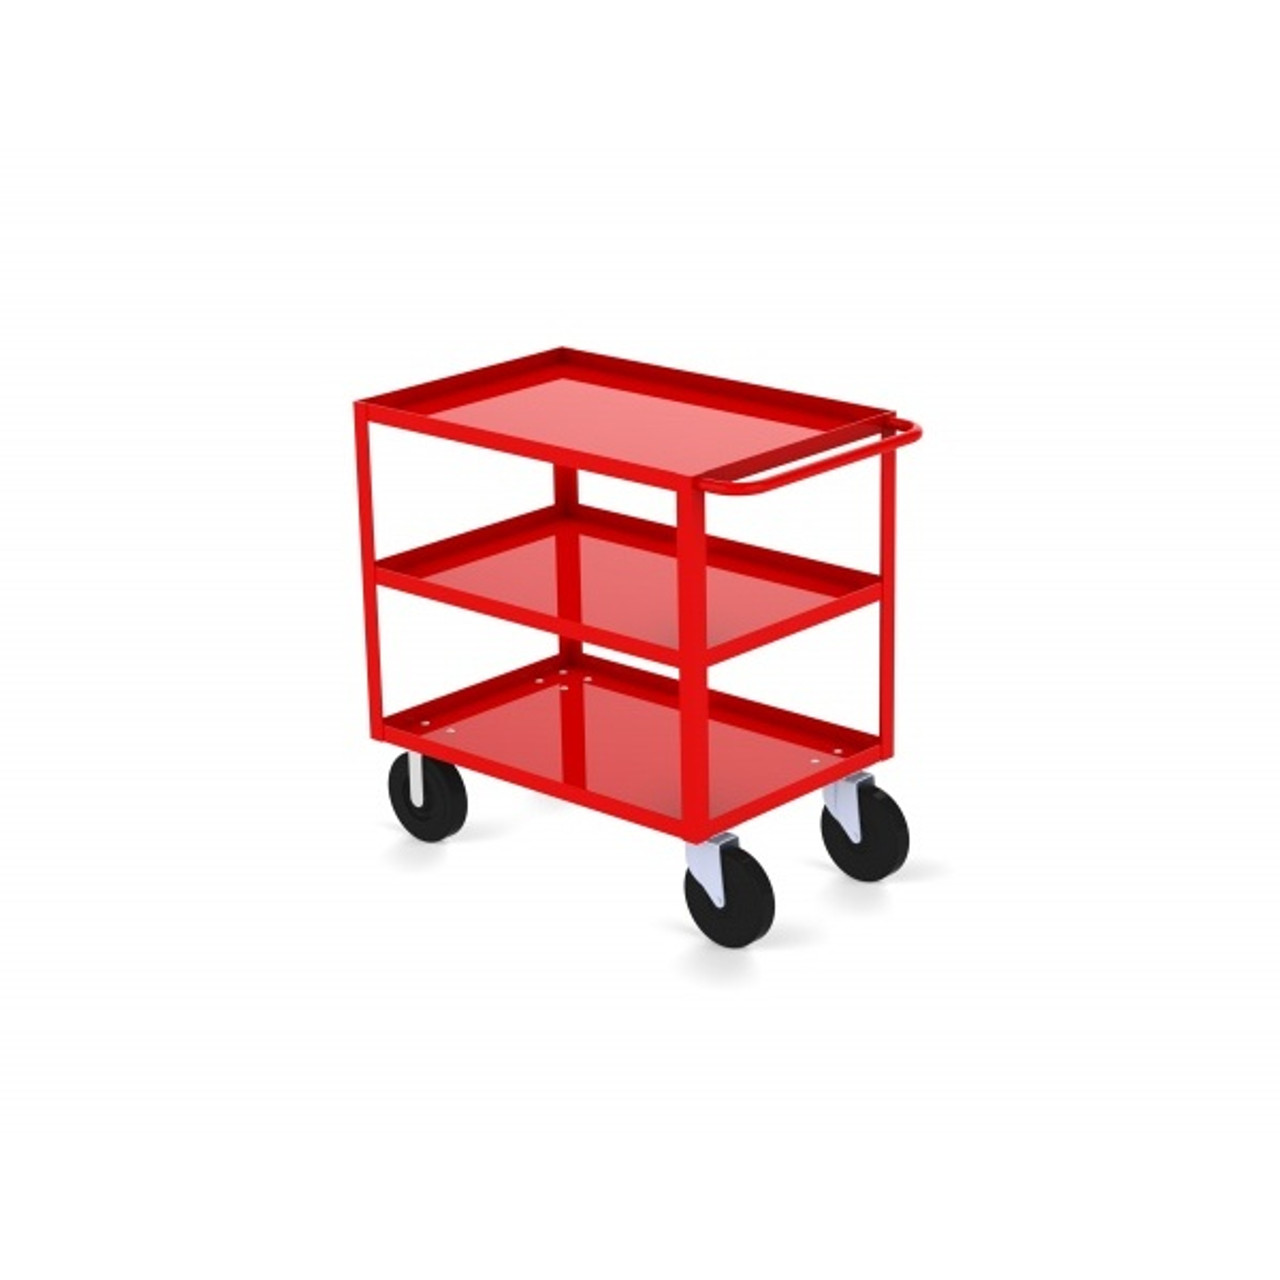 Valley Craft Three Shelf 24 x 36" Utility Cart, Red with Mold On Casters(CALL FOR BEST PRICING)